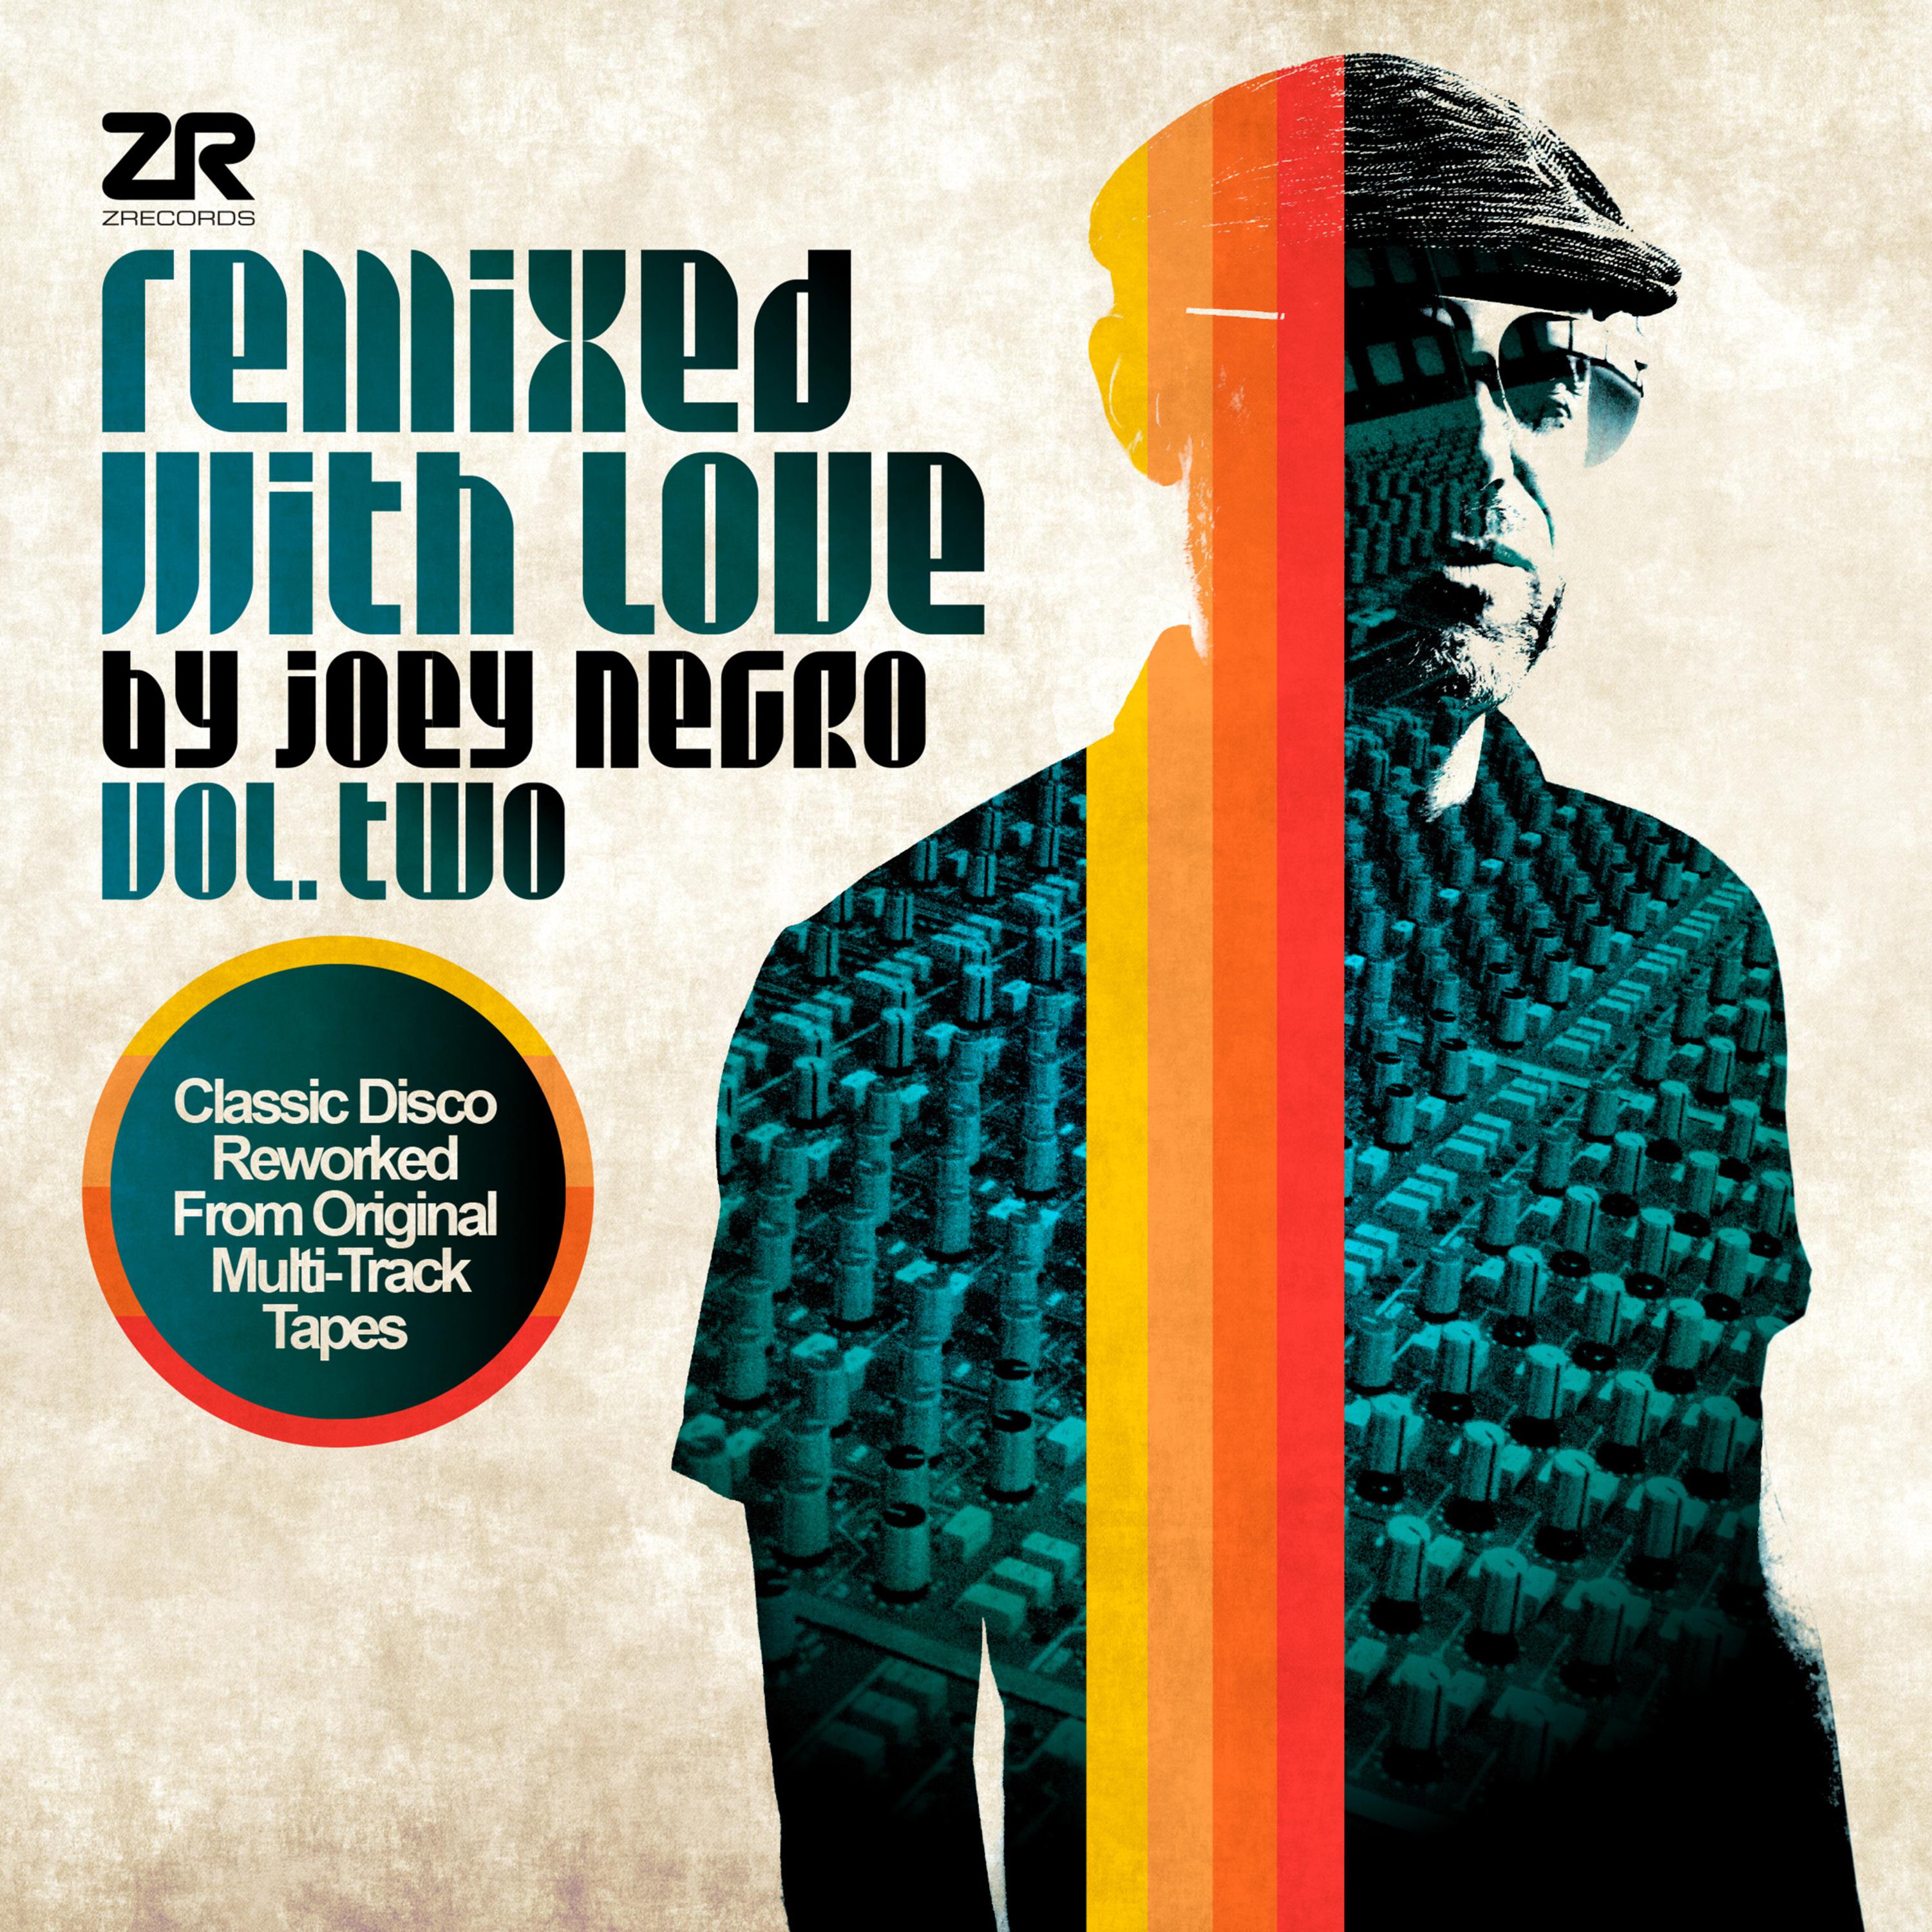 In the Thick of It (Joey Negro Endless Summer Mix)